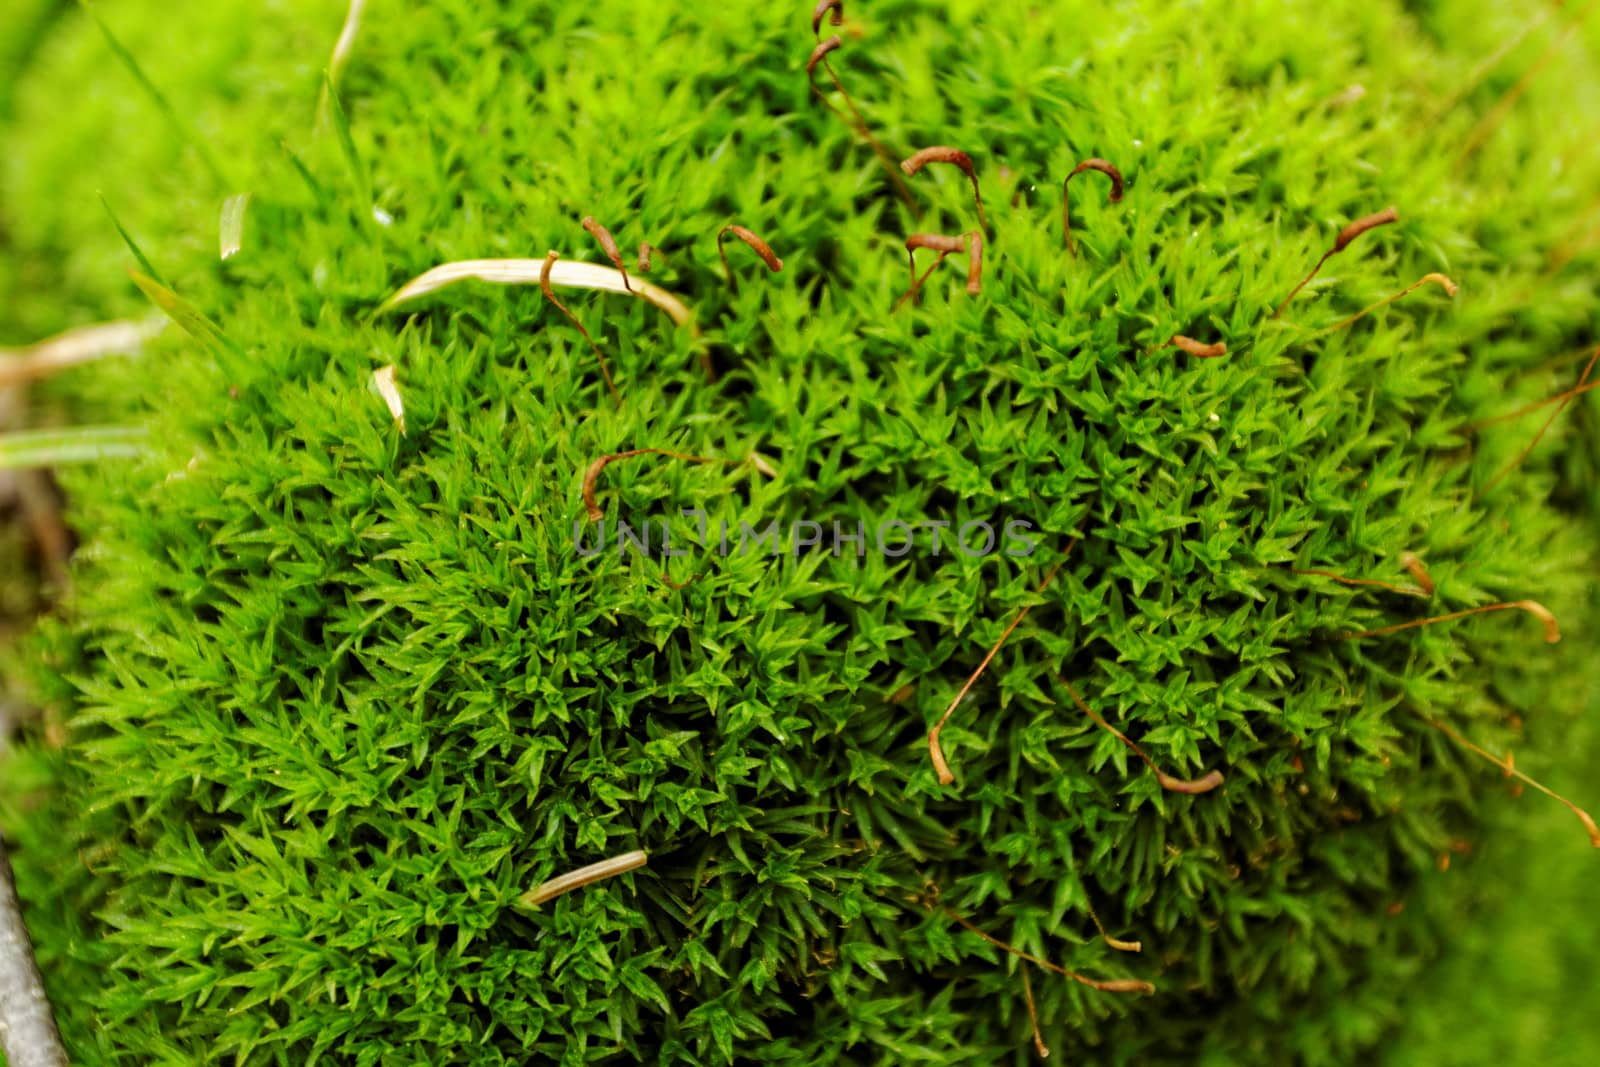 close-up picture about the green moss (macro)